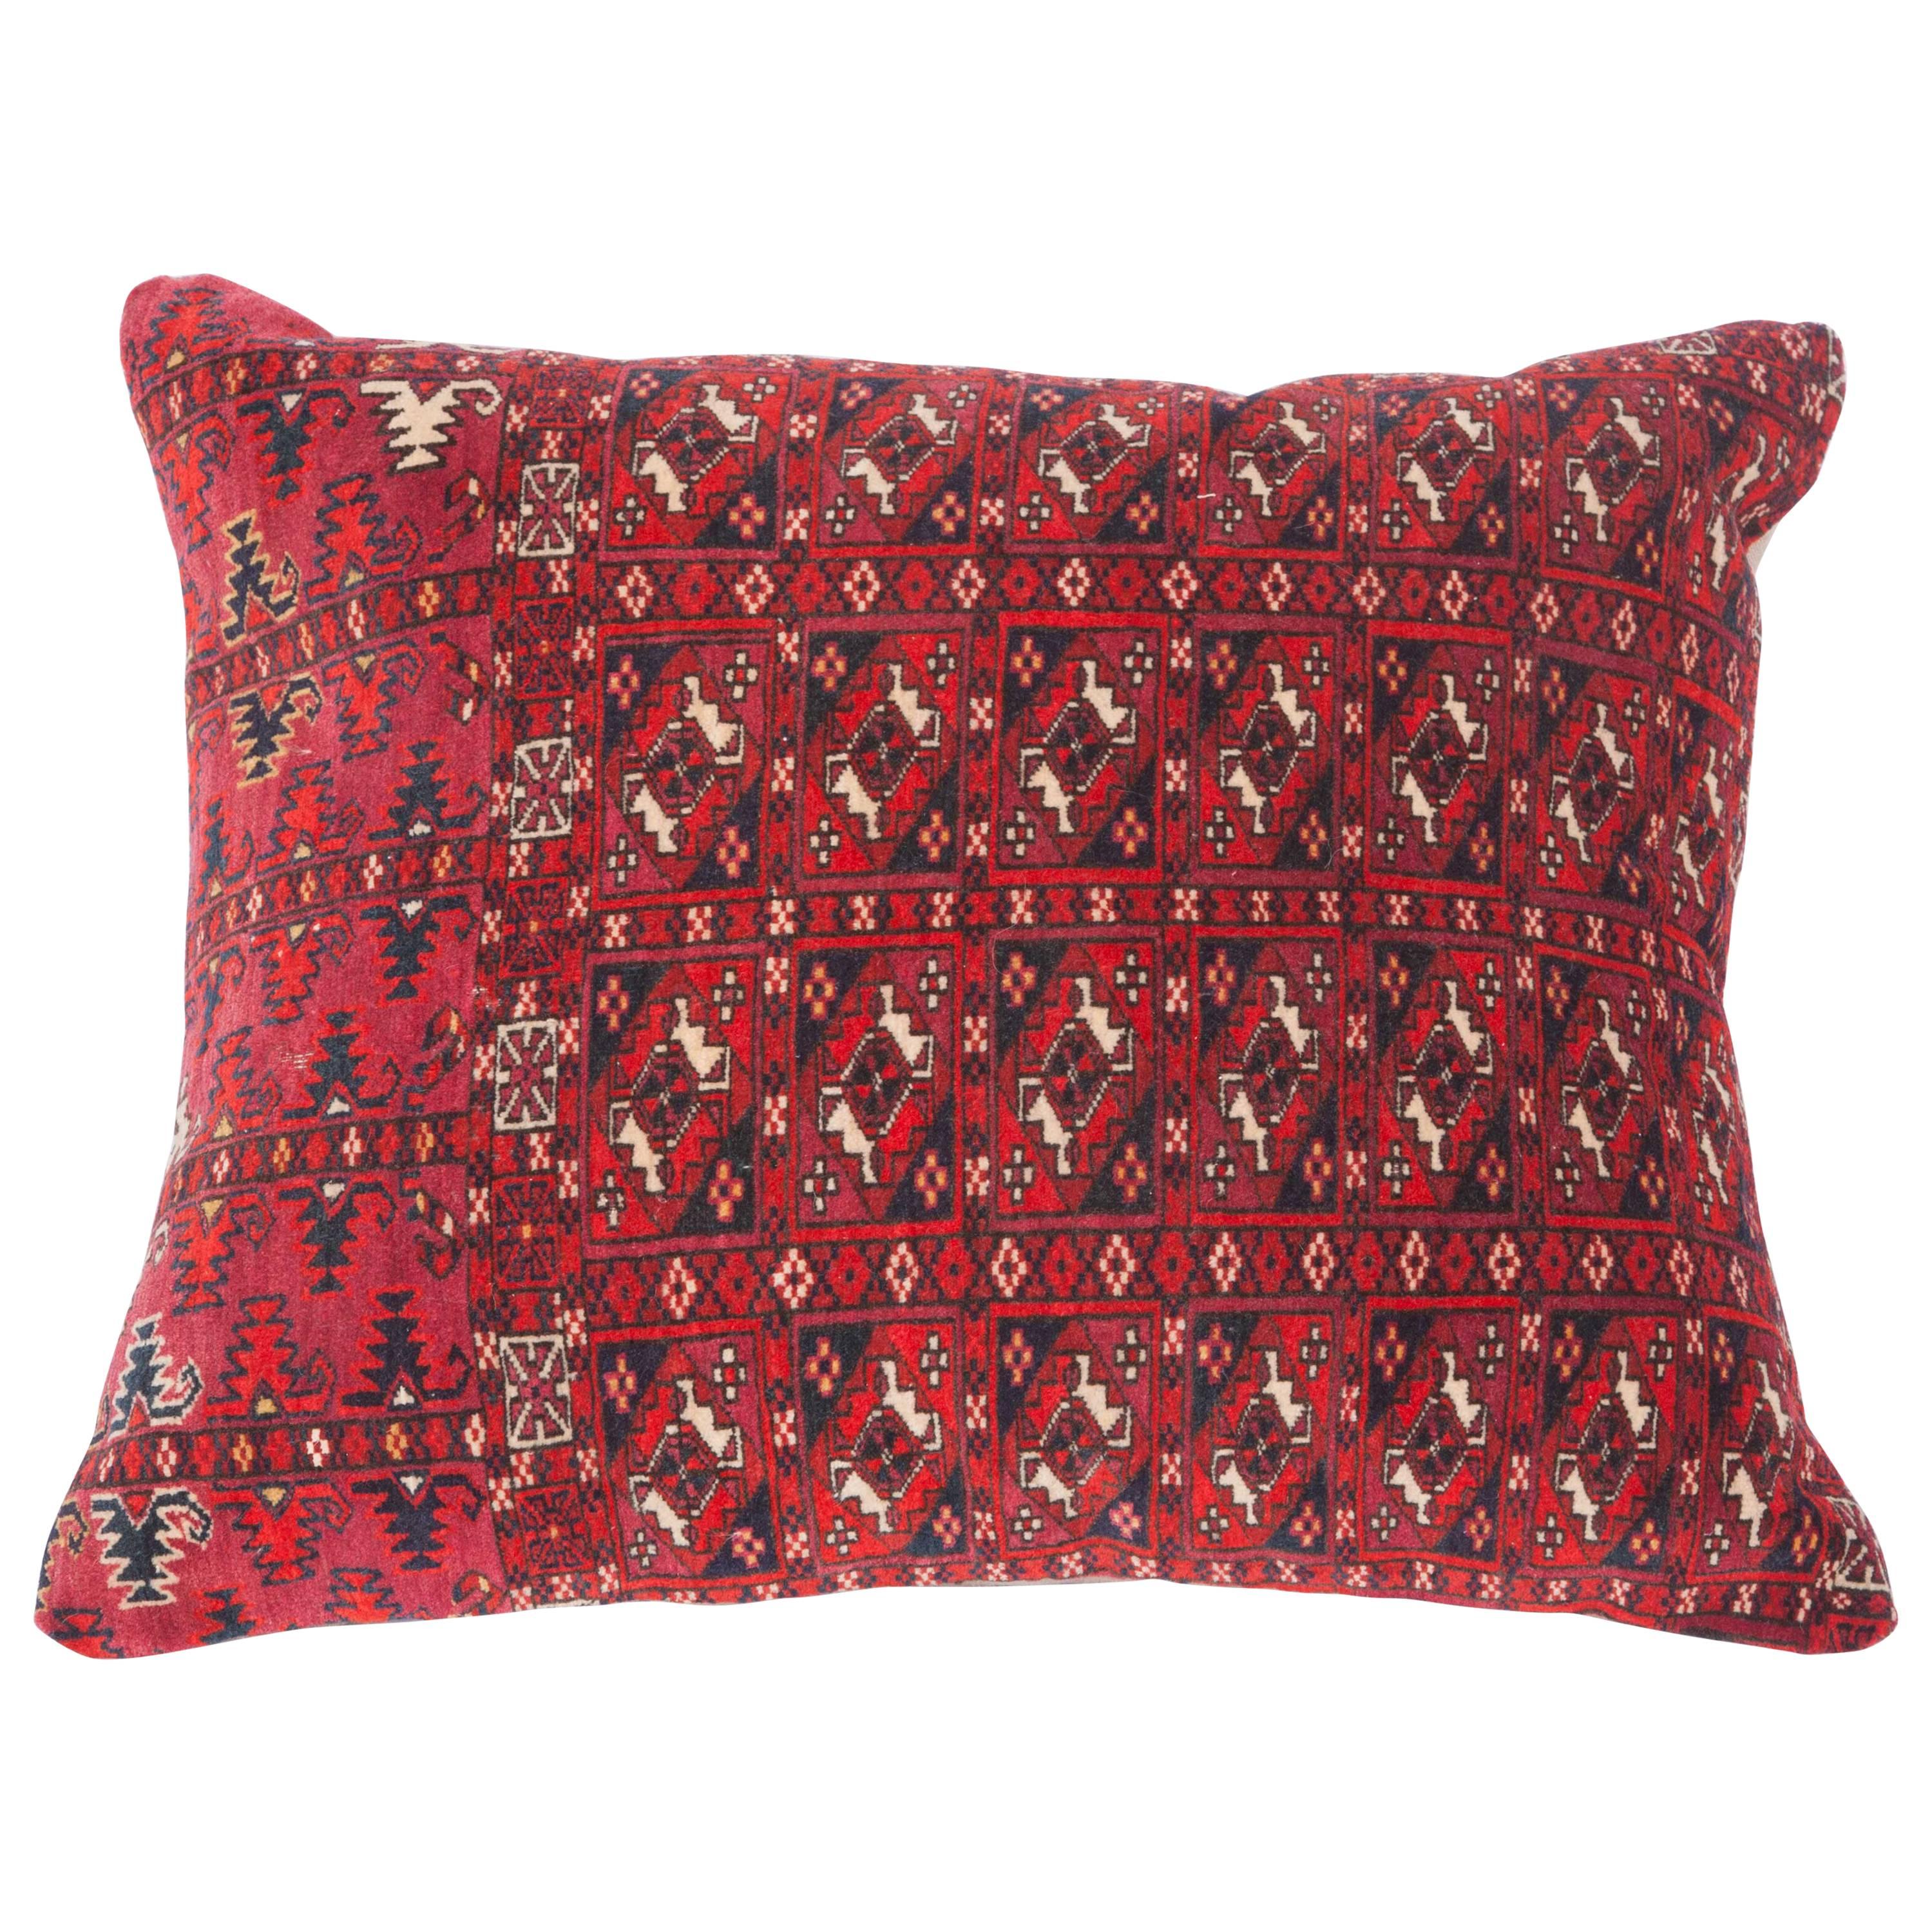 Antique Pillow Made Out of an Early 20th Century Turkmen Tekke Chuval